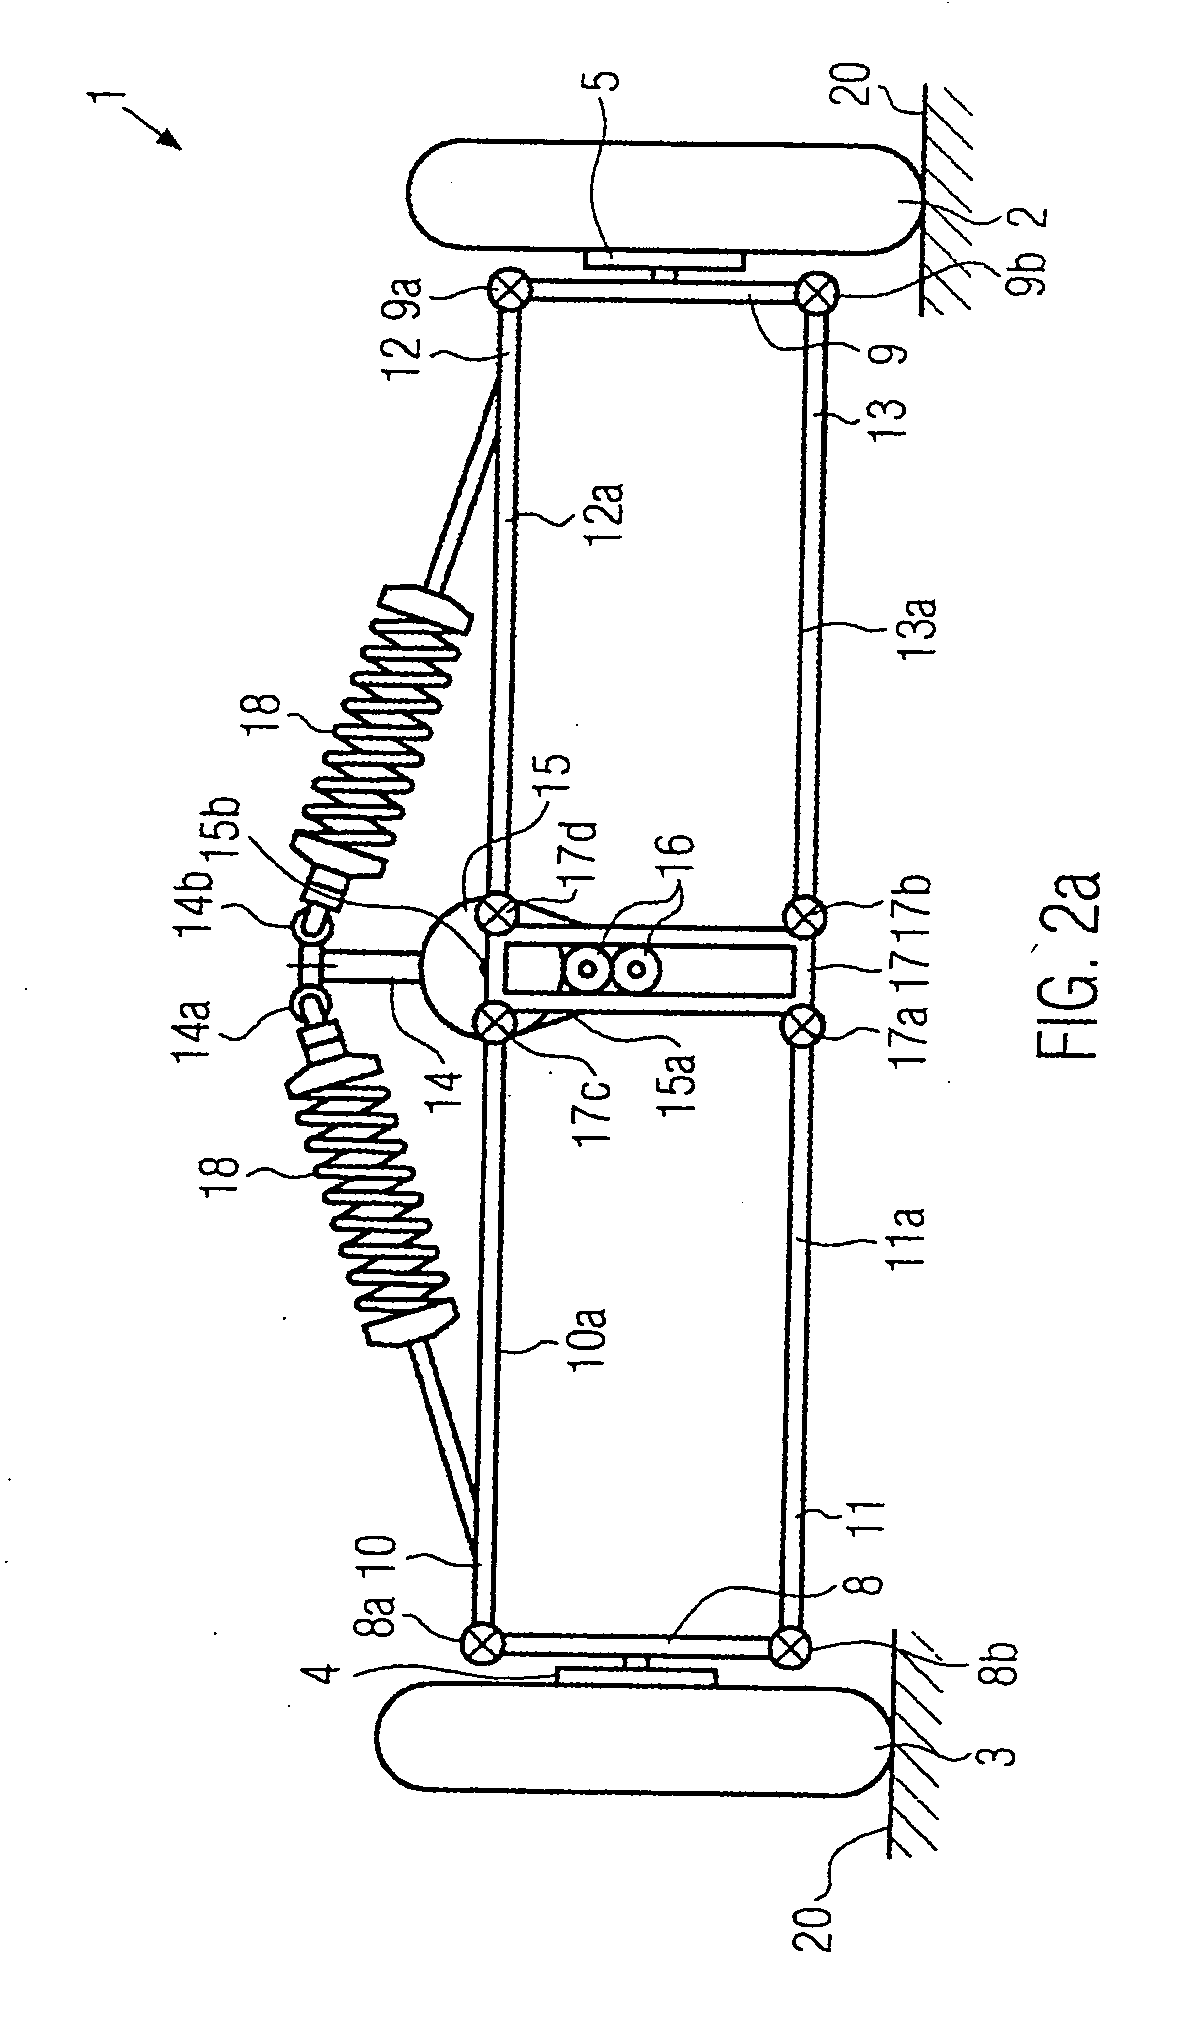 Suspension tilting module for a wheeled vehicle and a wheeled vehicle equipped with such a suspension tilting module